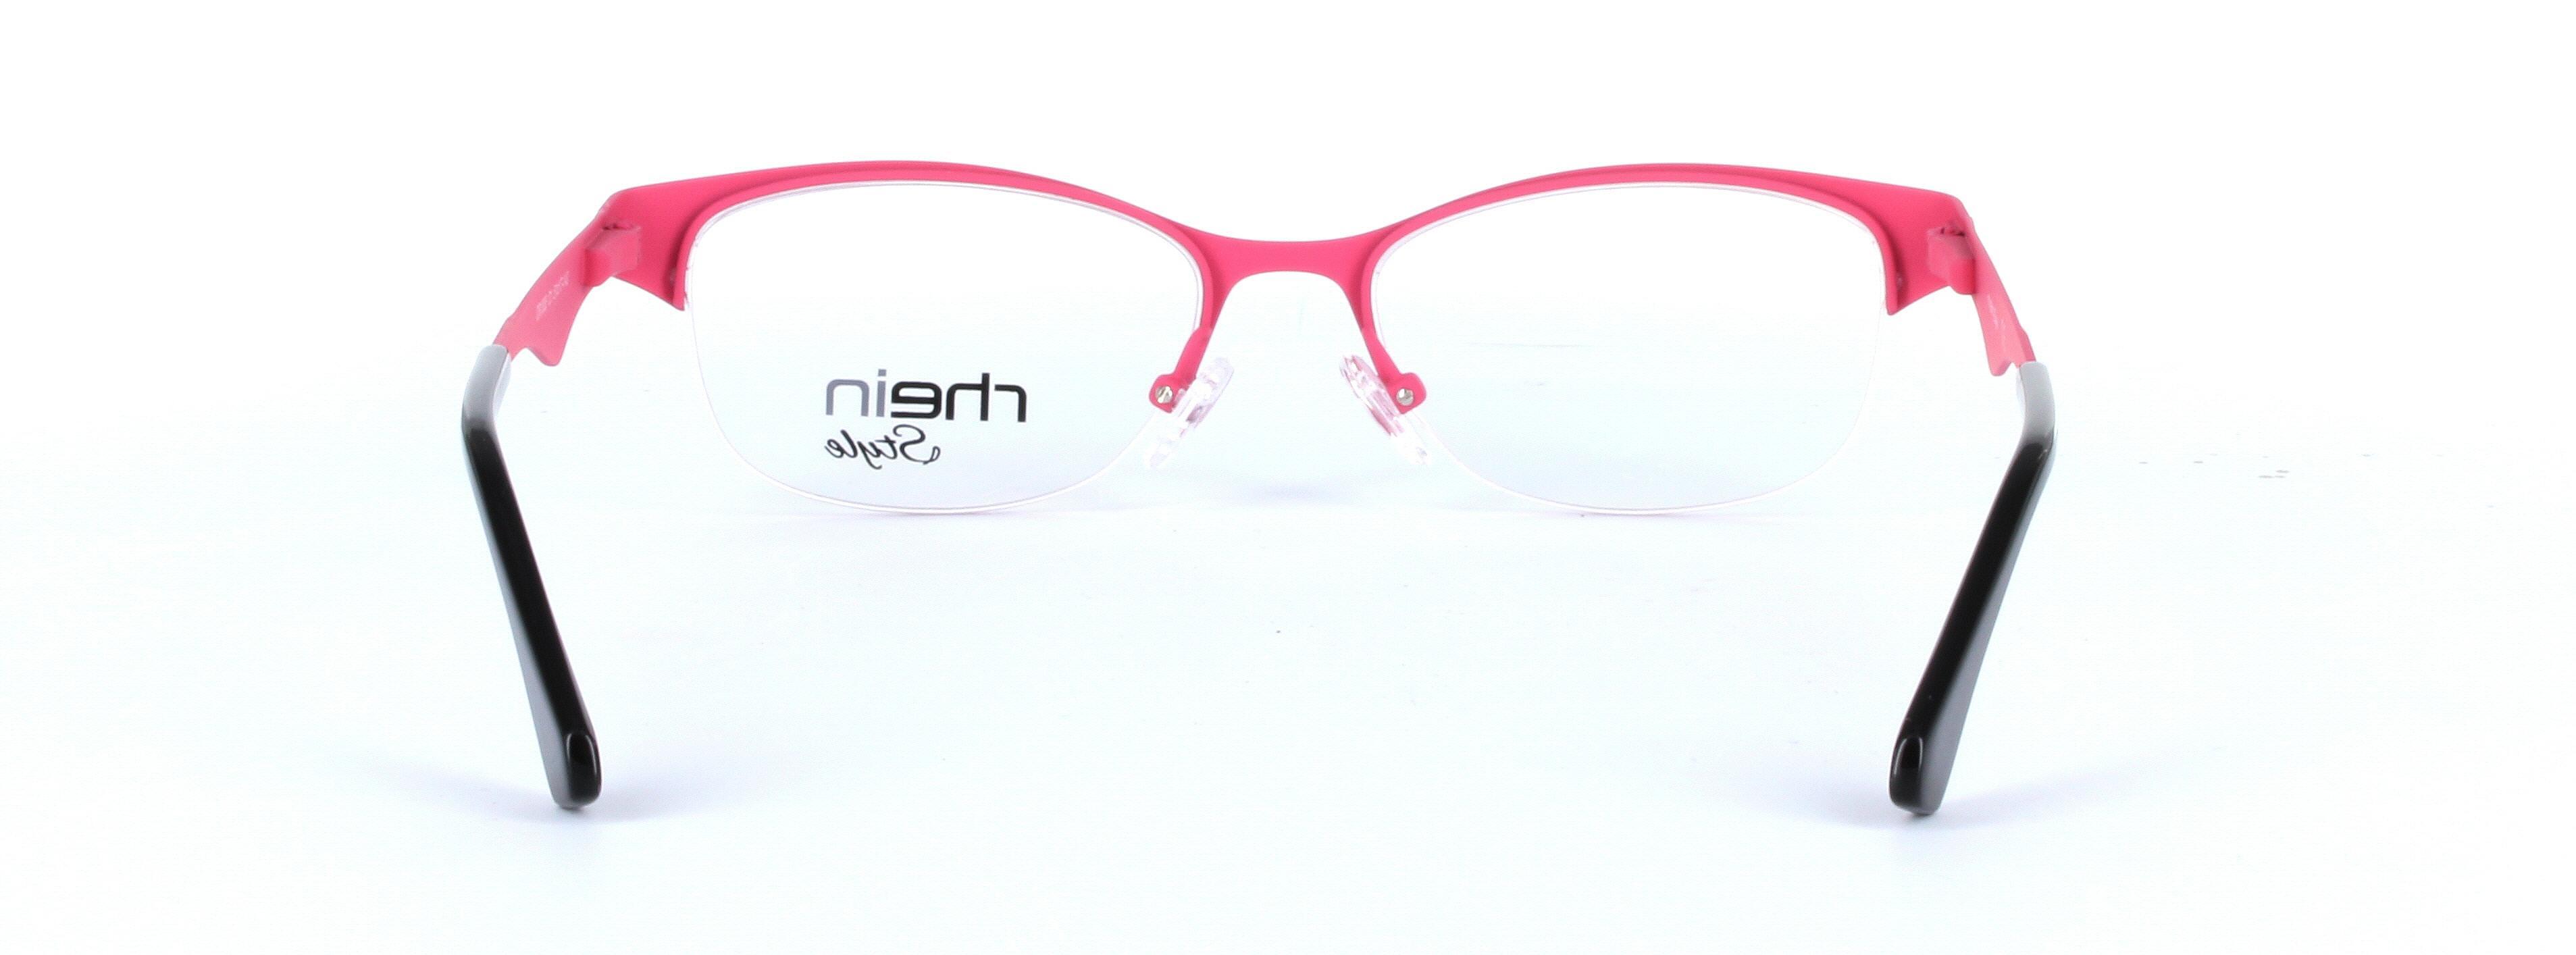 Kelly Black and Pink Semi Rimless Oval Rectangular Metal Glasses - Image View 3